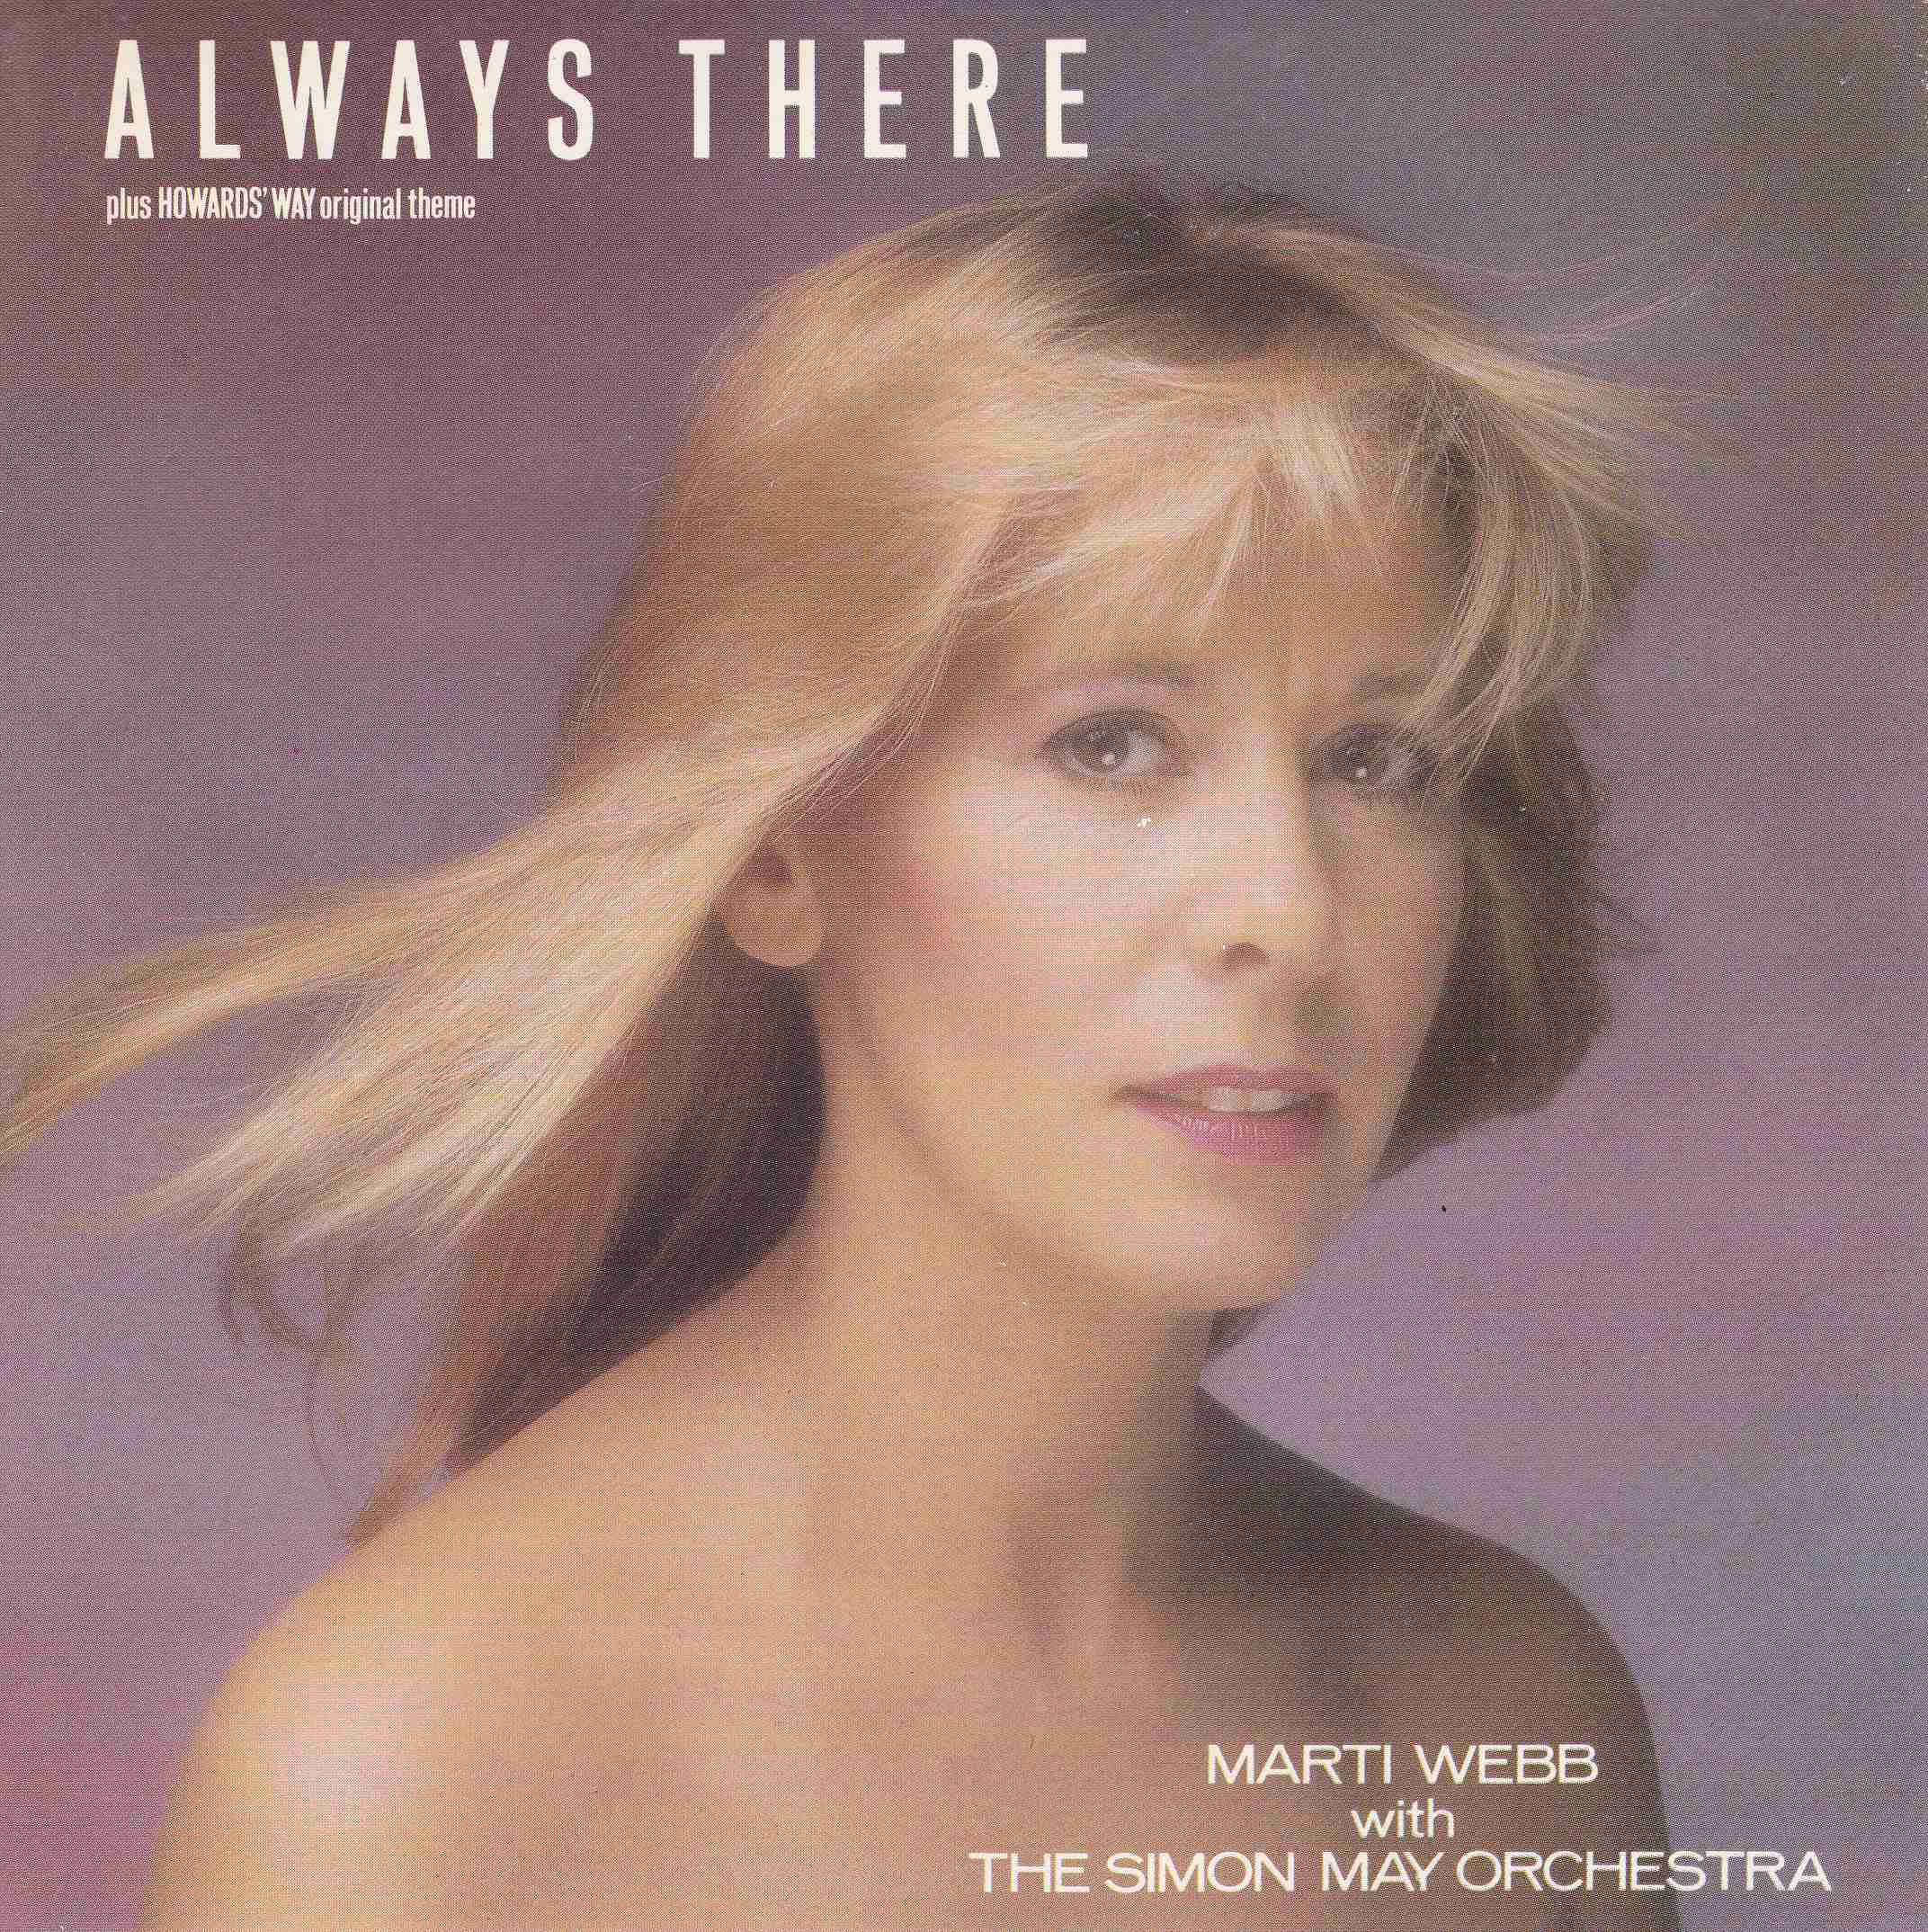 Picture of RESL 190 Always there (Howards' way) by artist Marti Webb with the Simon May Orchestra from the BBC singles - Records and Tapes library